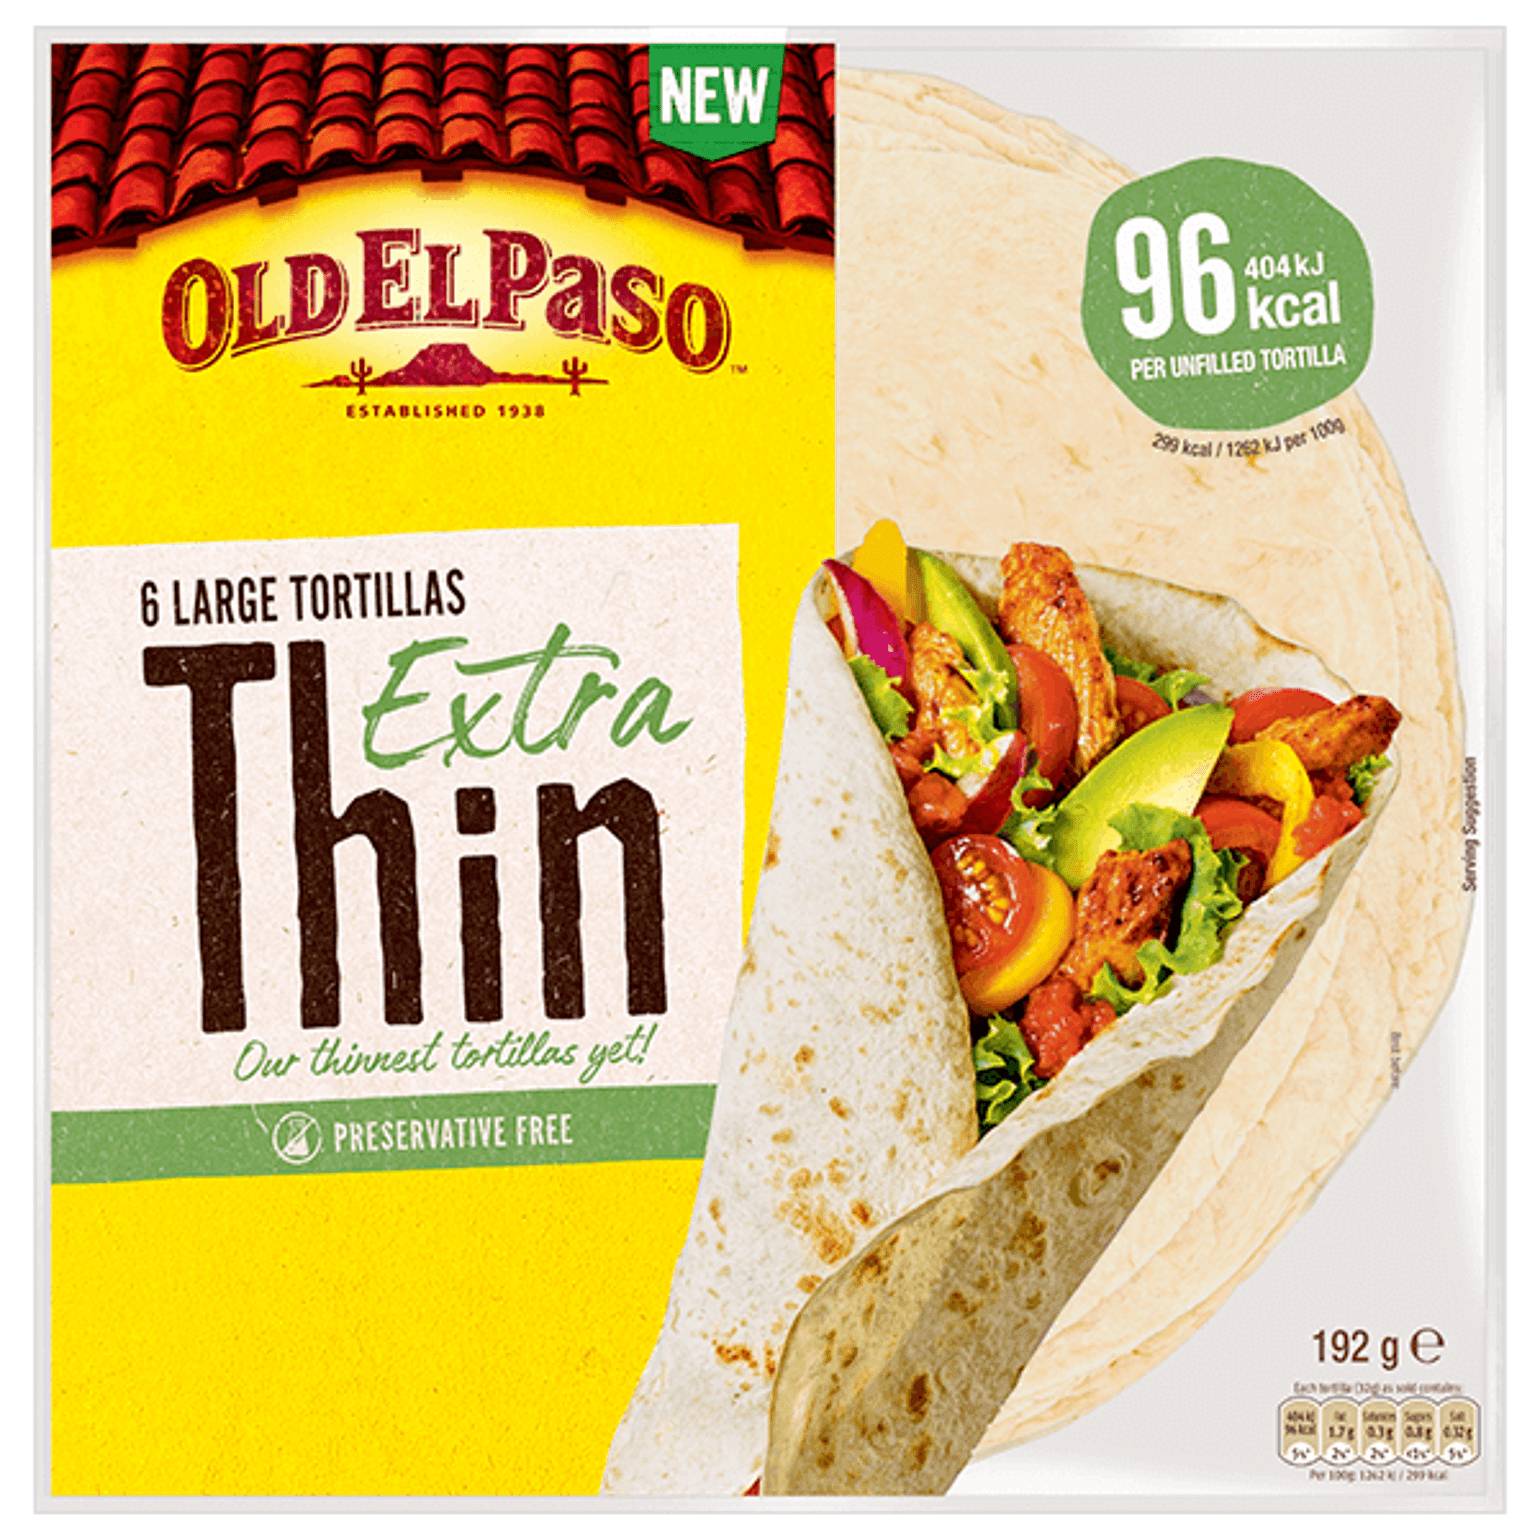 a pack of Old El Paso's extra thin 6 large tortillas (192g)